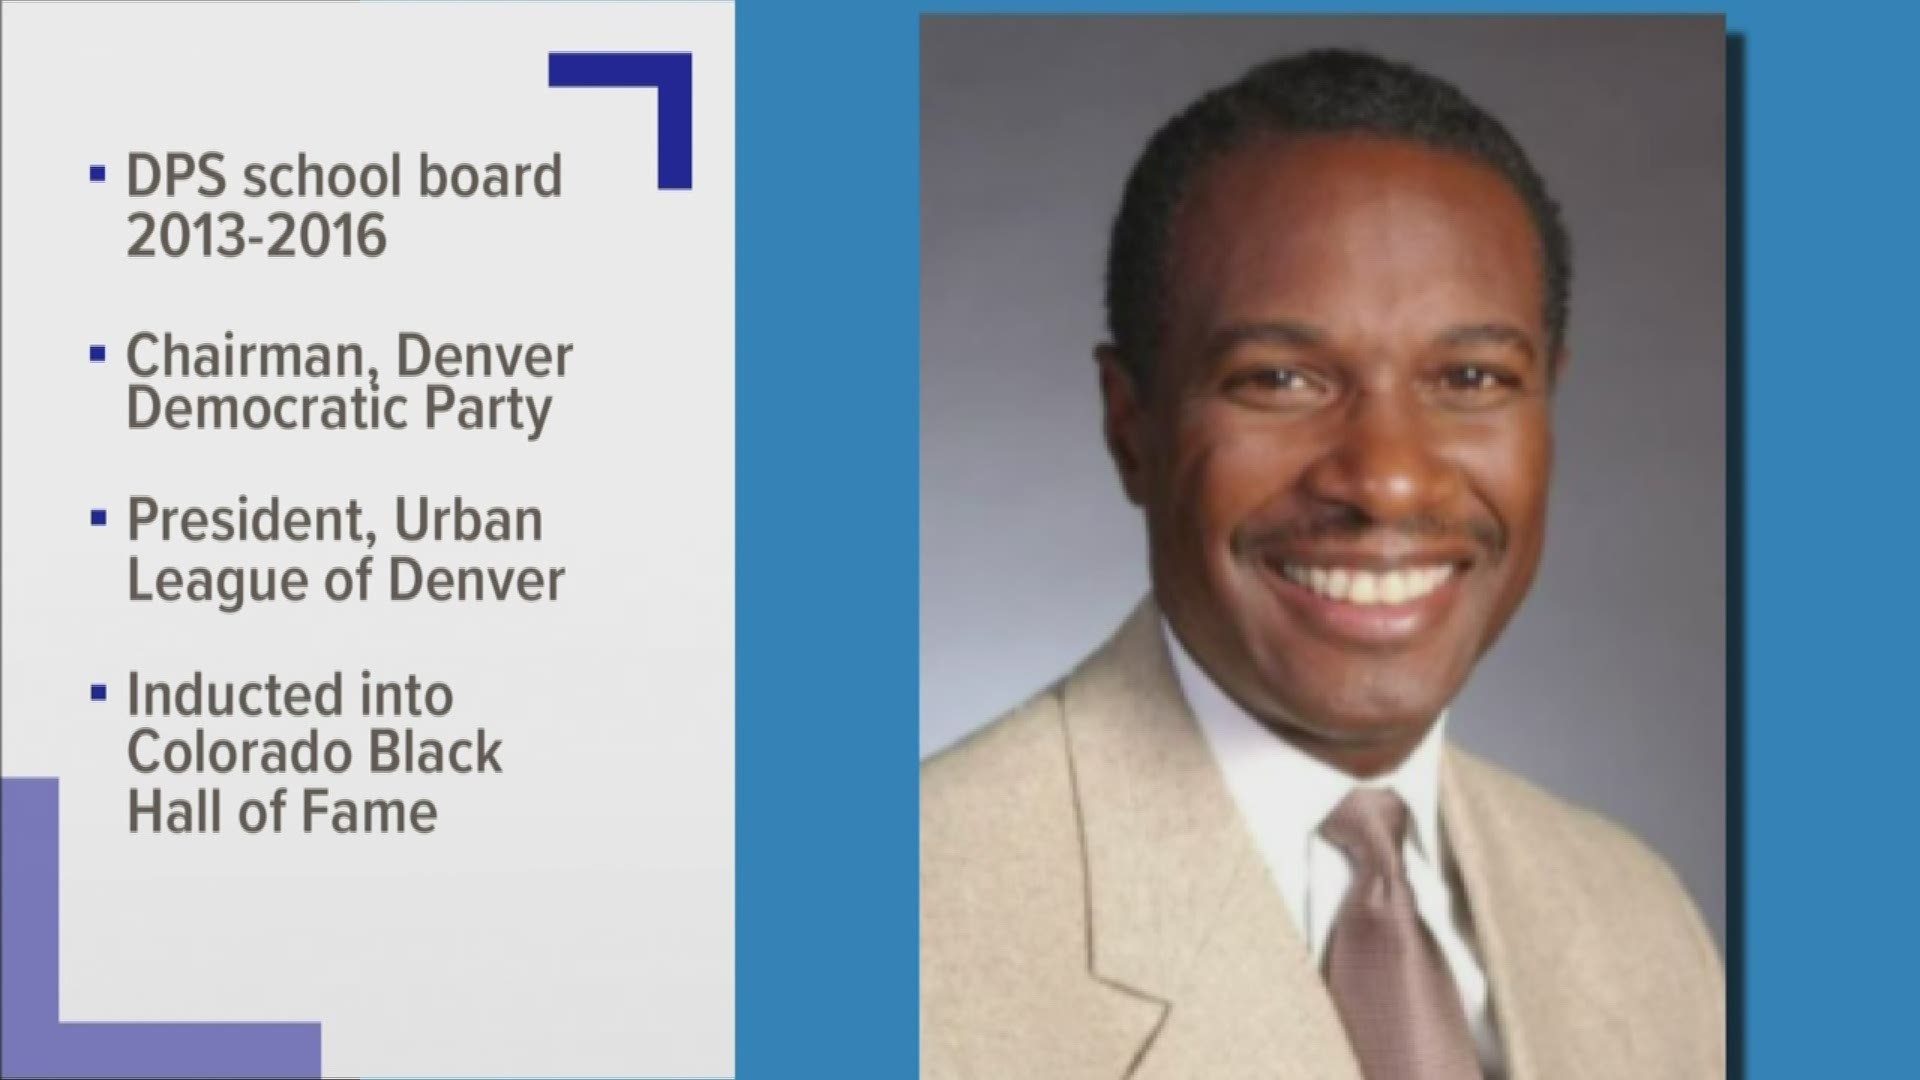 He fought for high-quality school choices especially in Montbello, Park Hill and Stapleton.